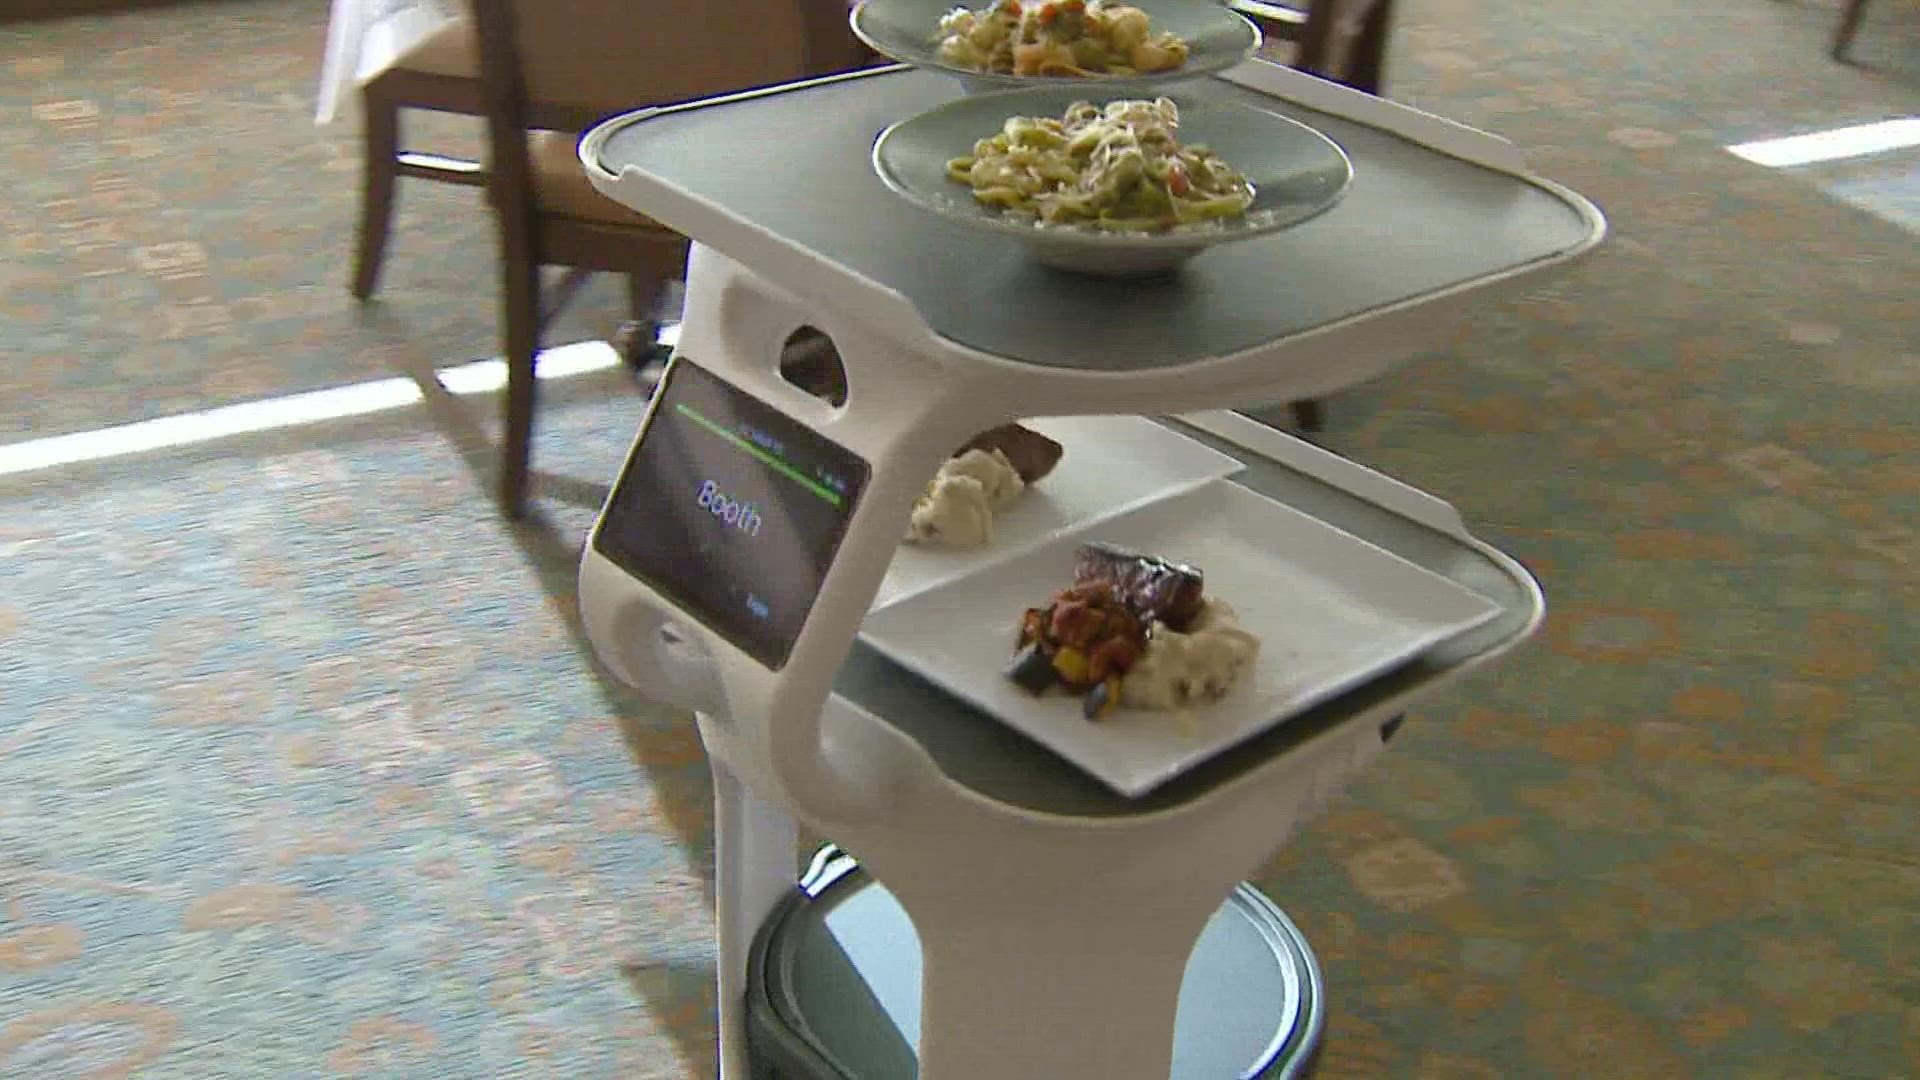 In need of more help in their dining room, Frasier Retirement Community turned to an automated server.